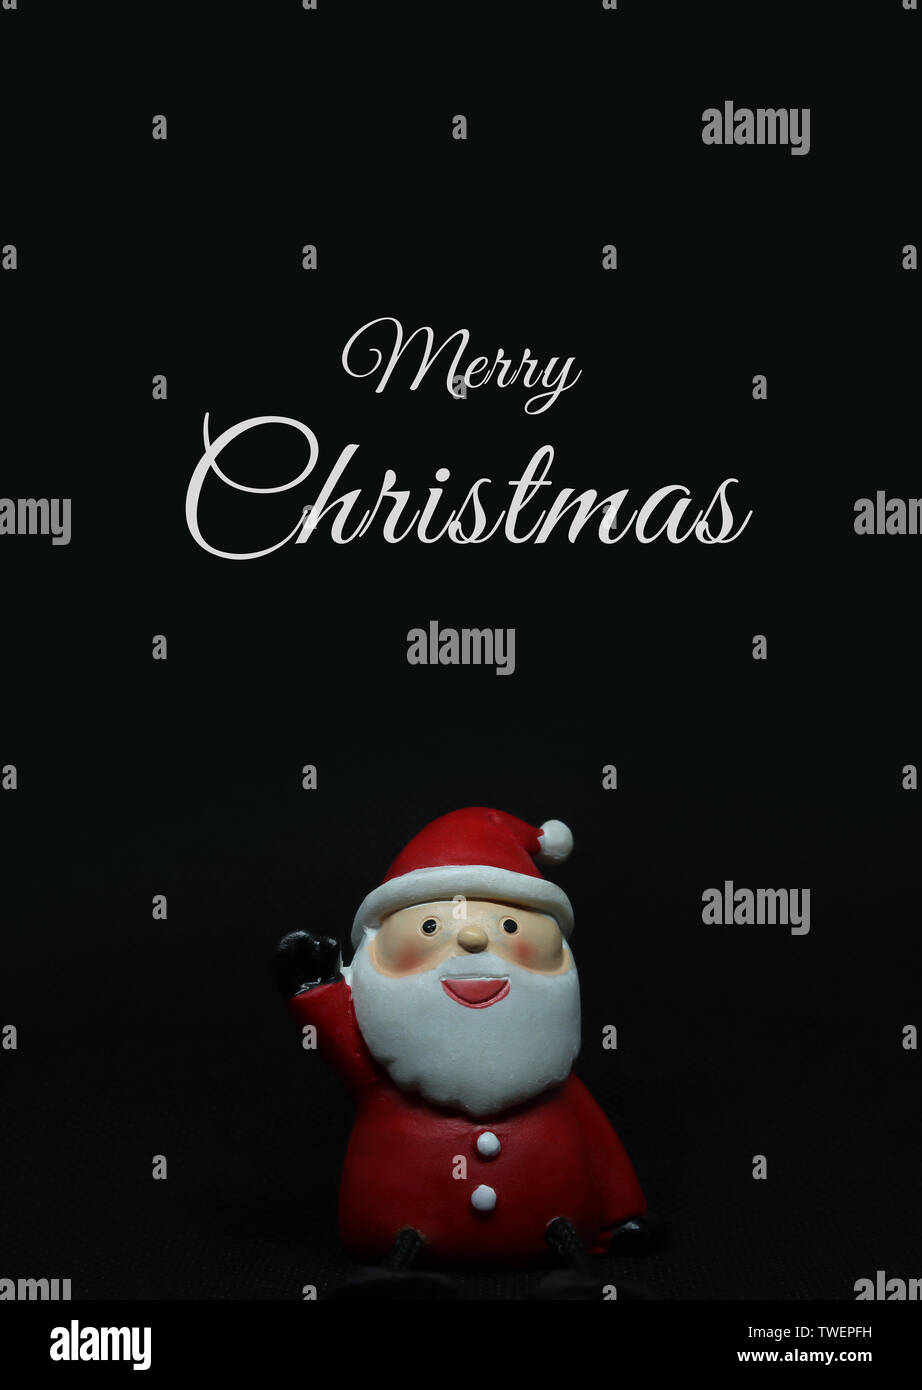 Adorable santa claus doll on black background with white Merry Christmas text above. Stock Photo